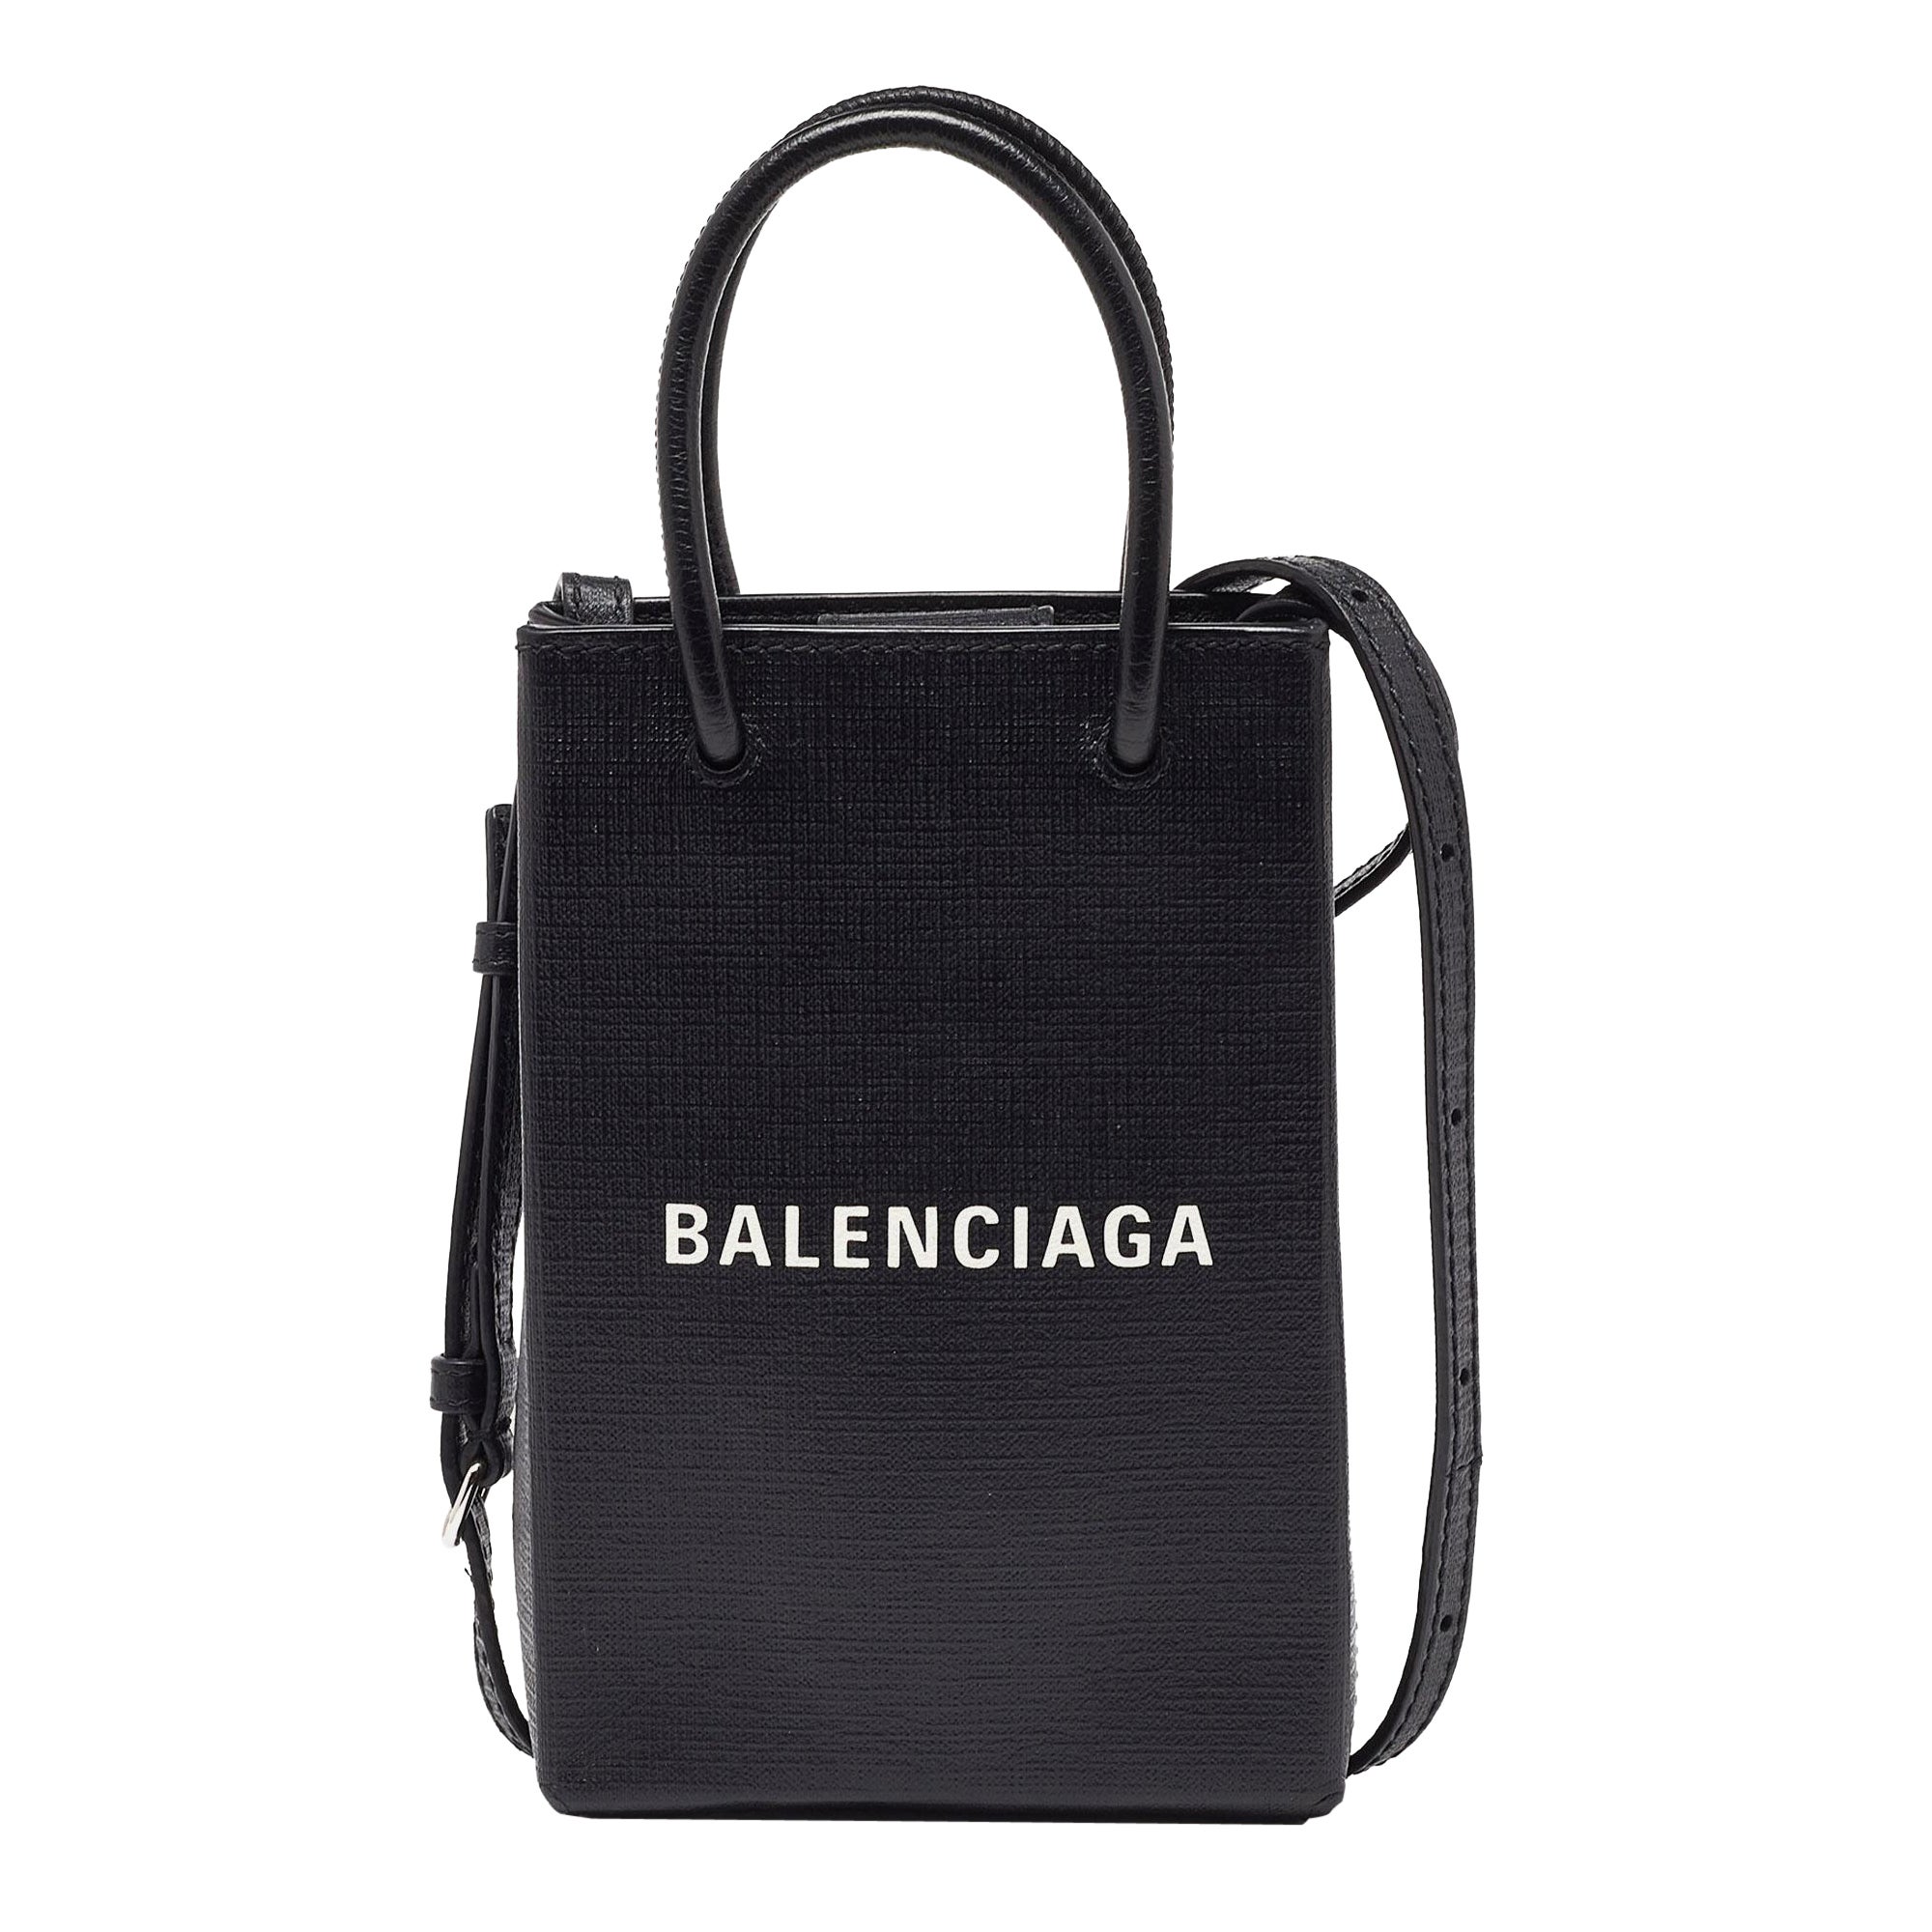 Can I get a Balenciaga bag authenticated at the store?